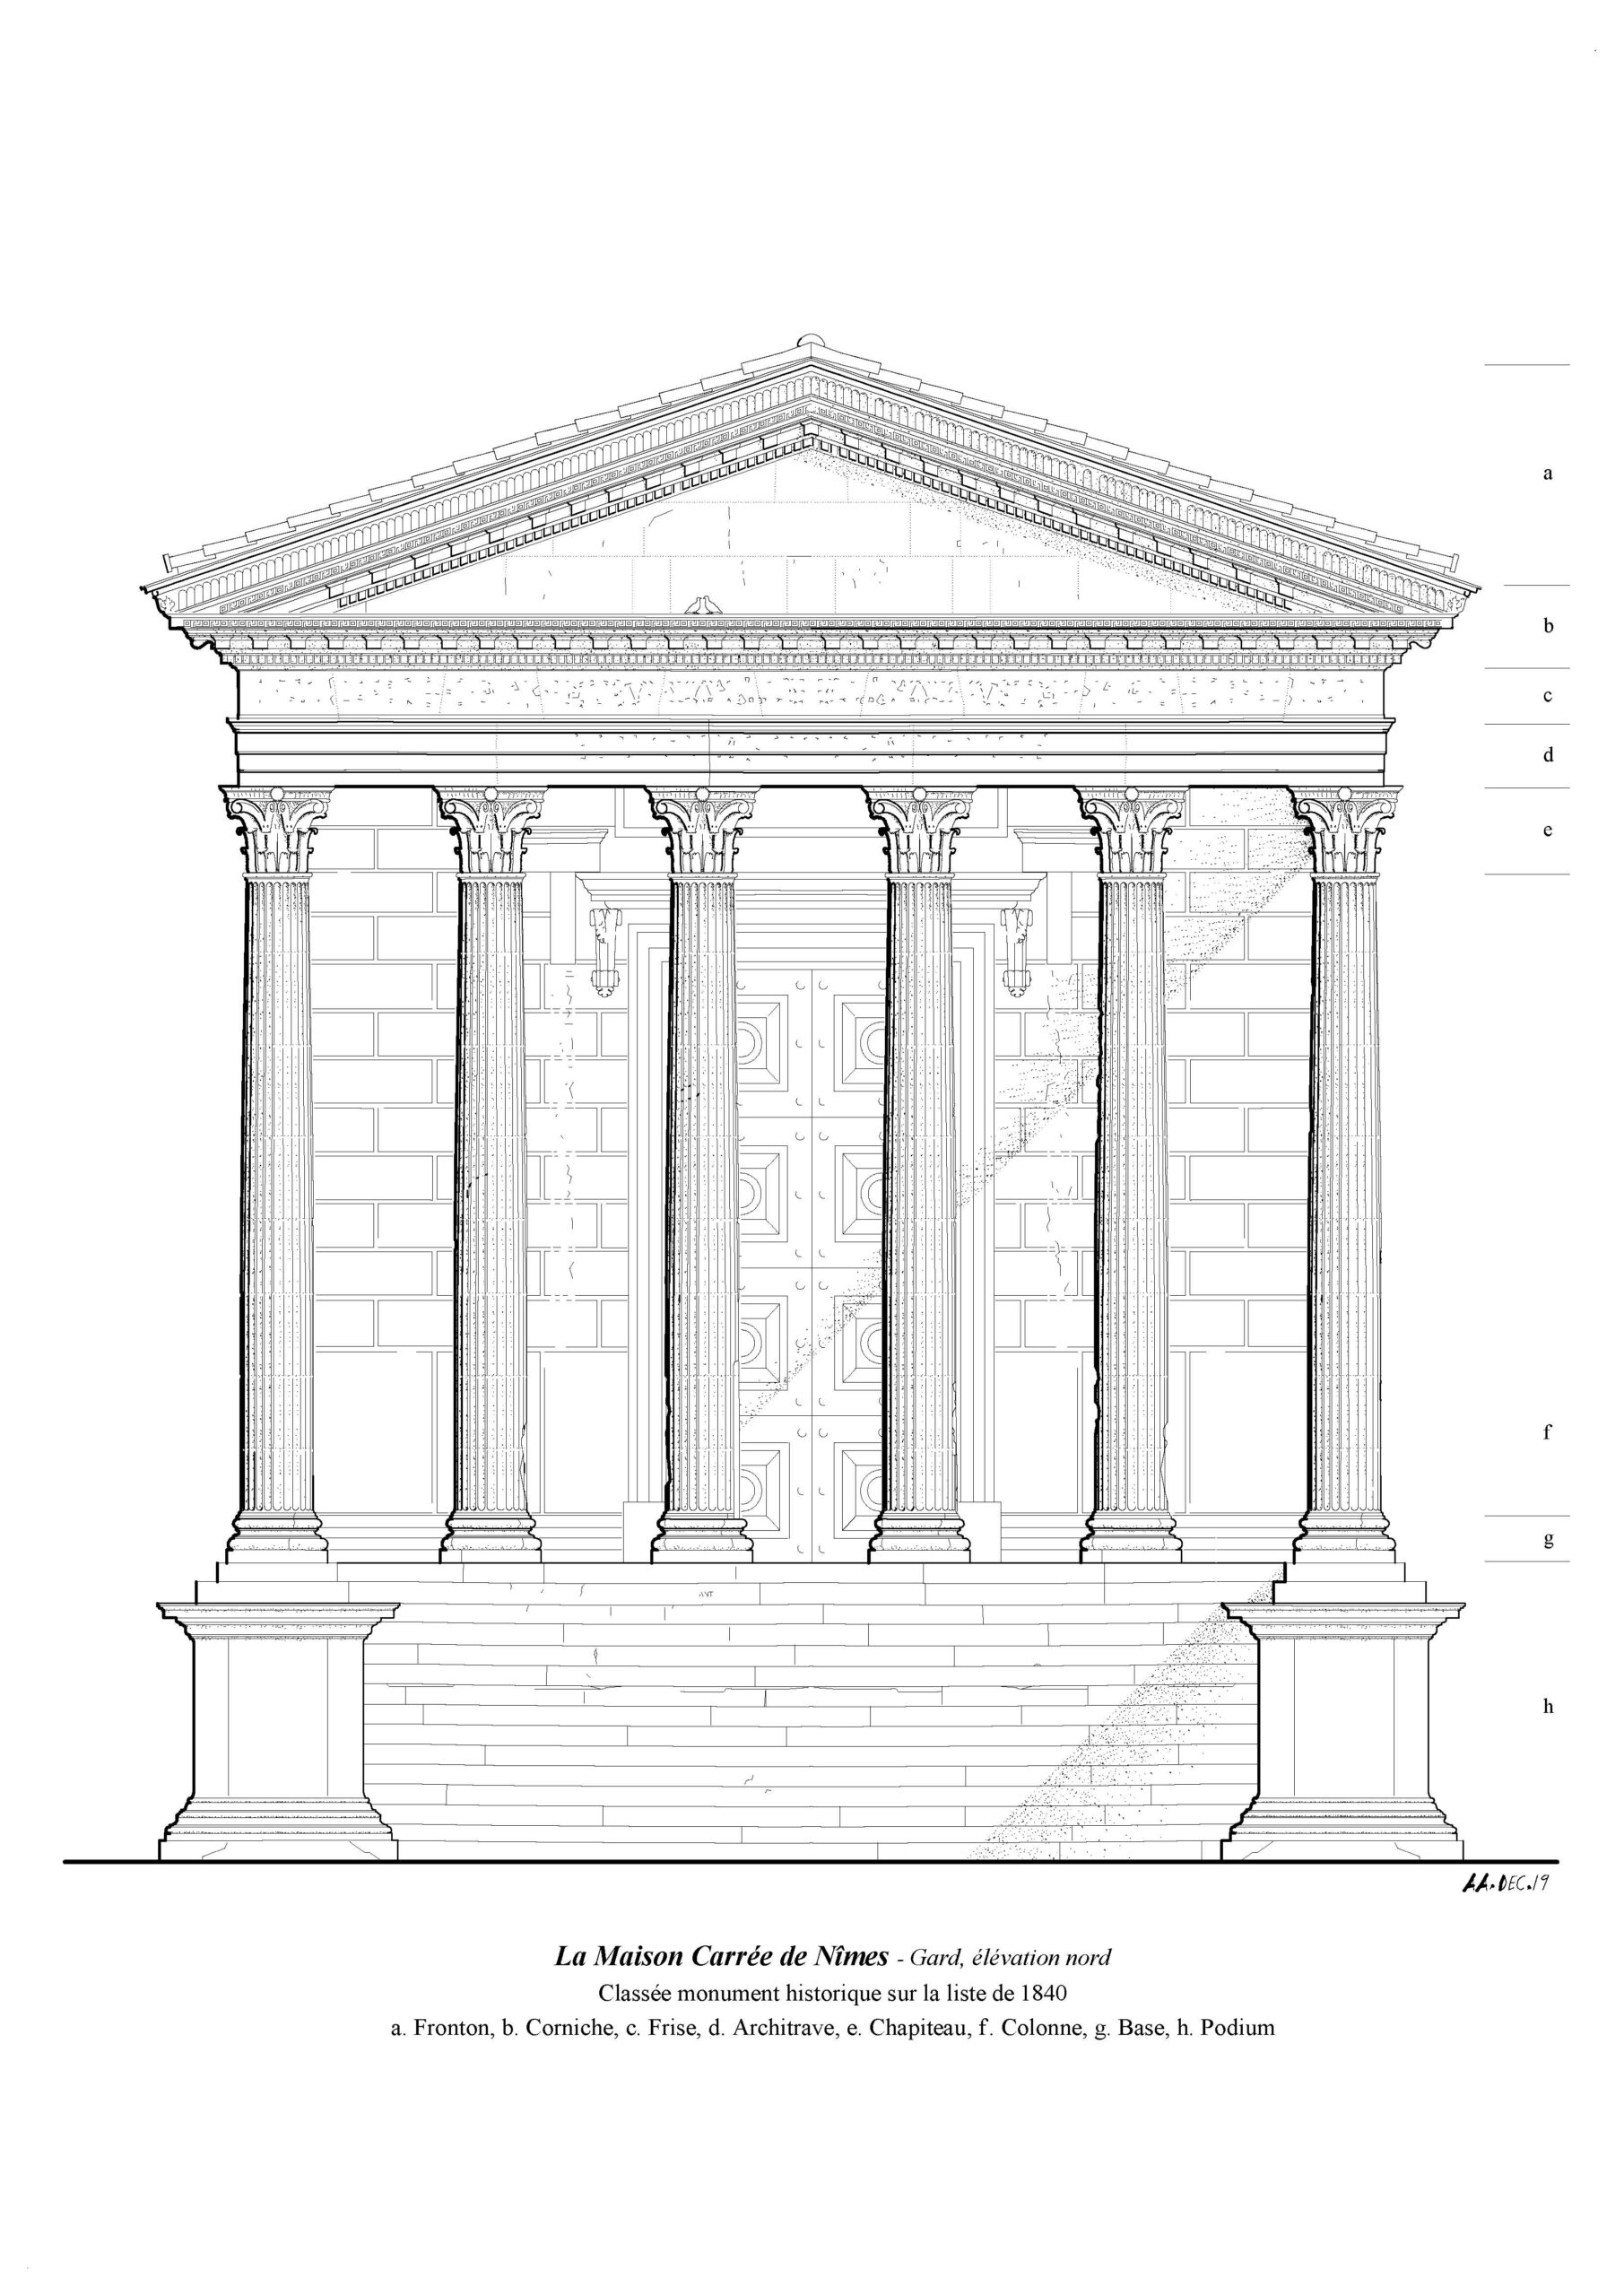 Blueprints of an old monument